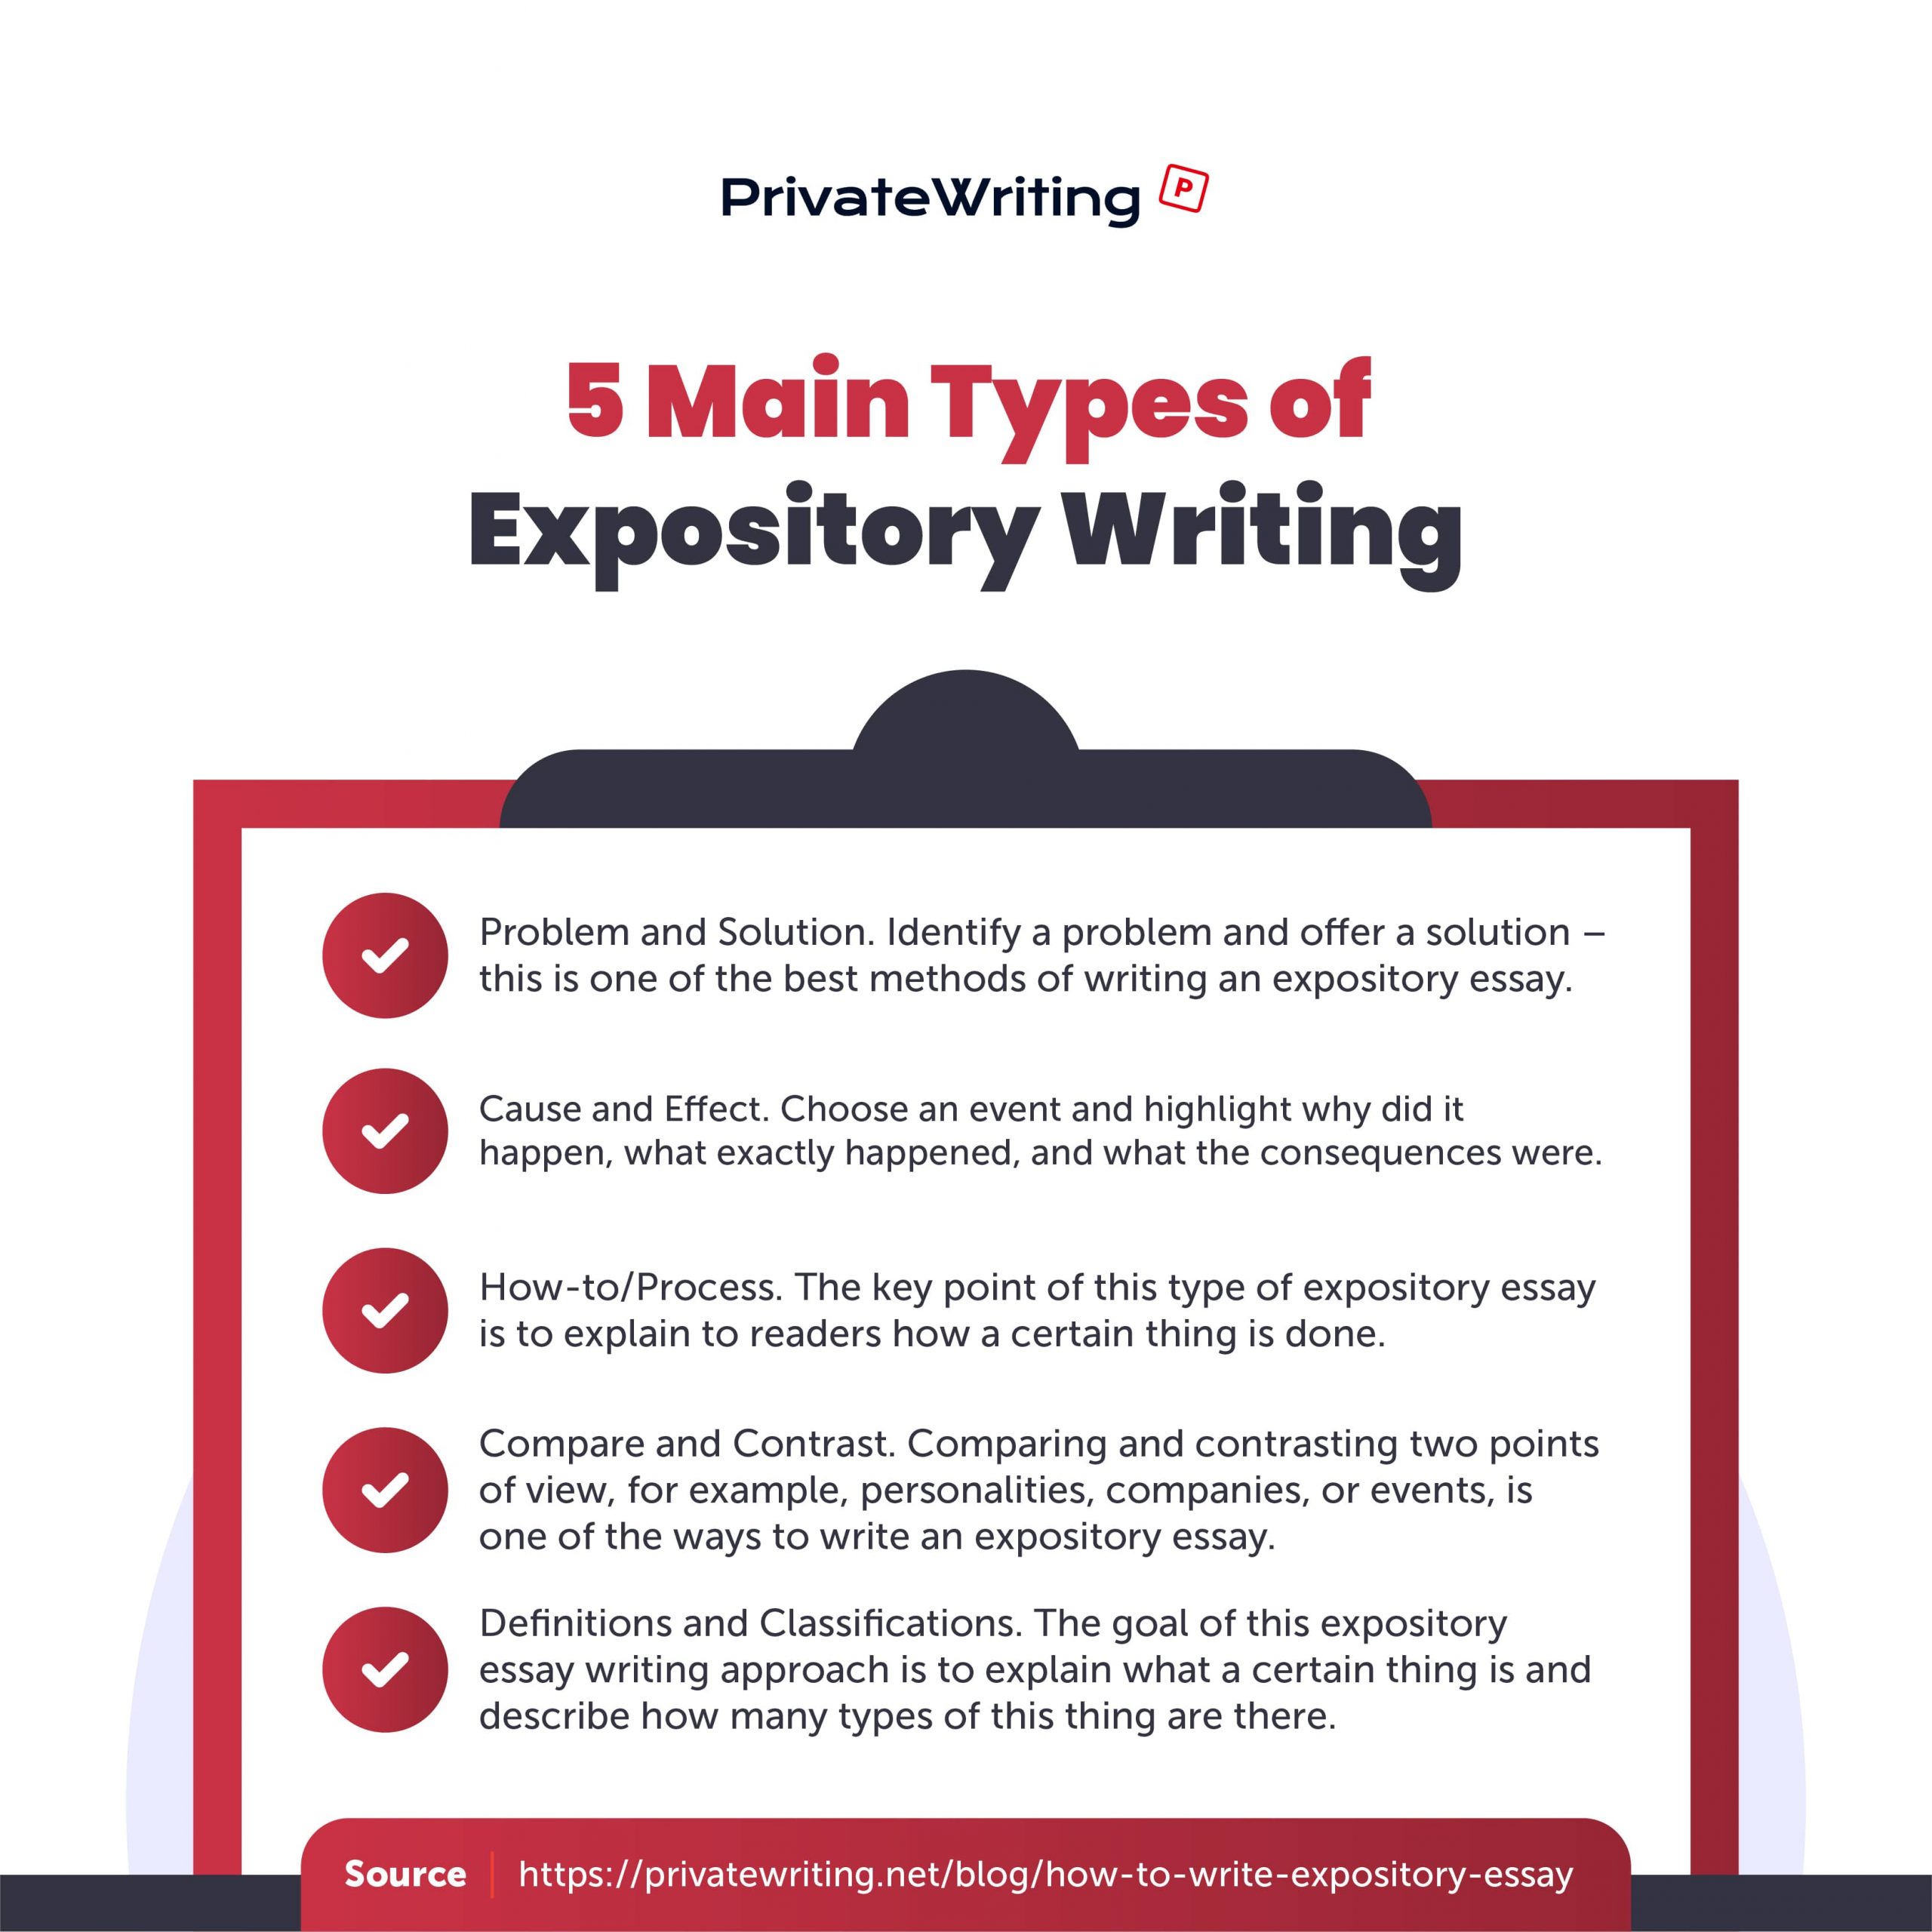 steps on writing an expository essay